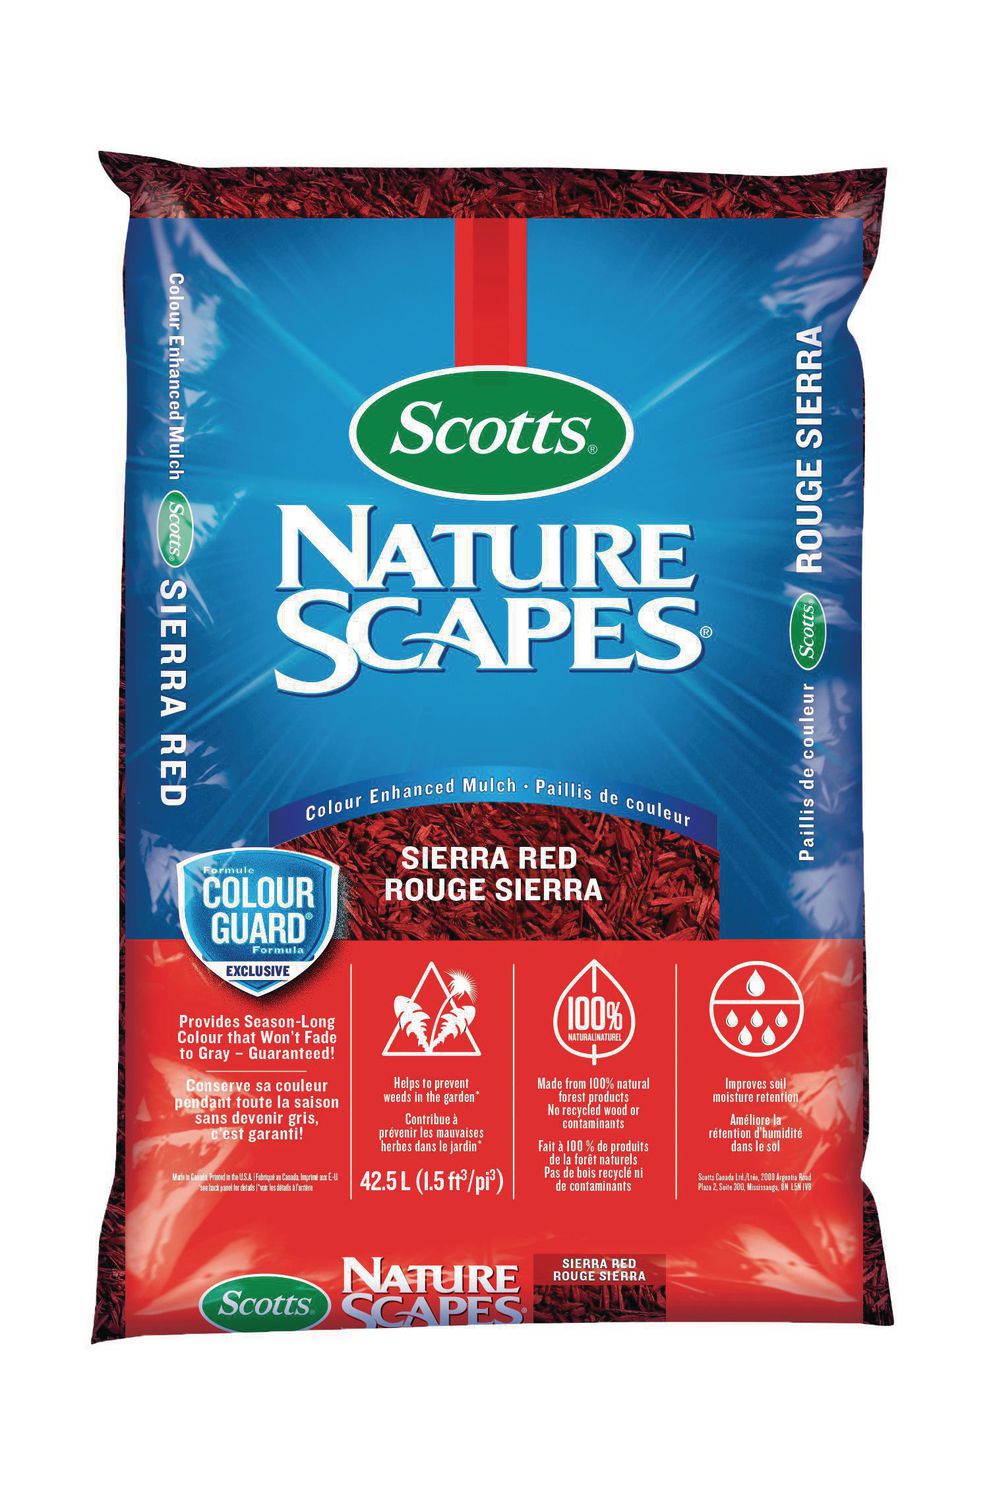 scotts-nature-scapes-sierra-red-42-5l-walmart-canada